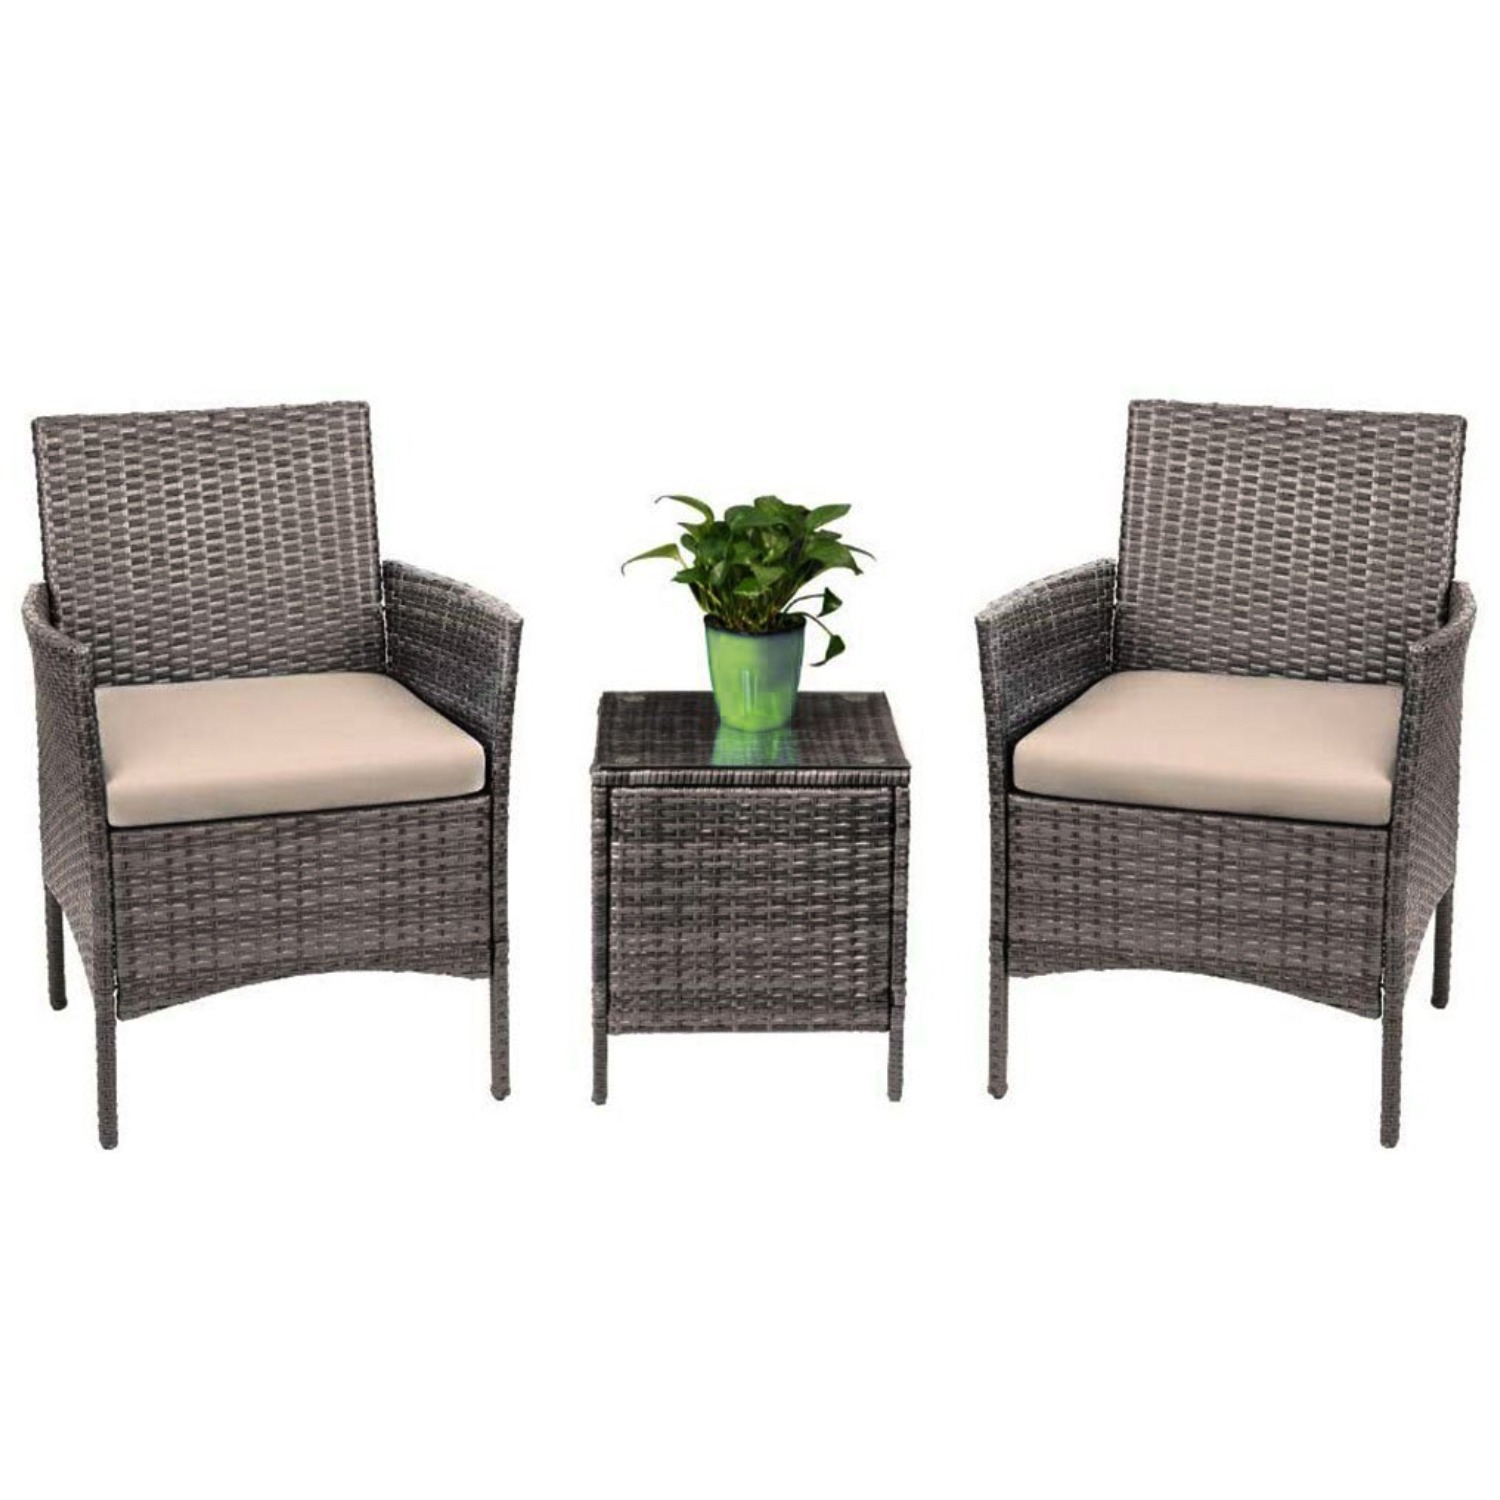 Canaan 3 Piece Patio Rattan Furniture Set – 2 Relaxing Cushion Chairs With a Cafe Table - Beige - image 1 of 10